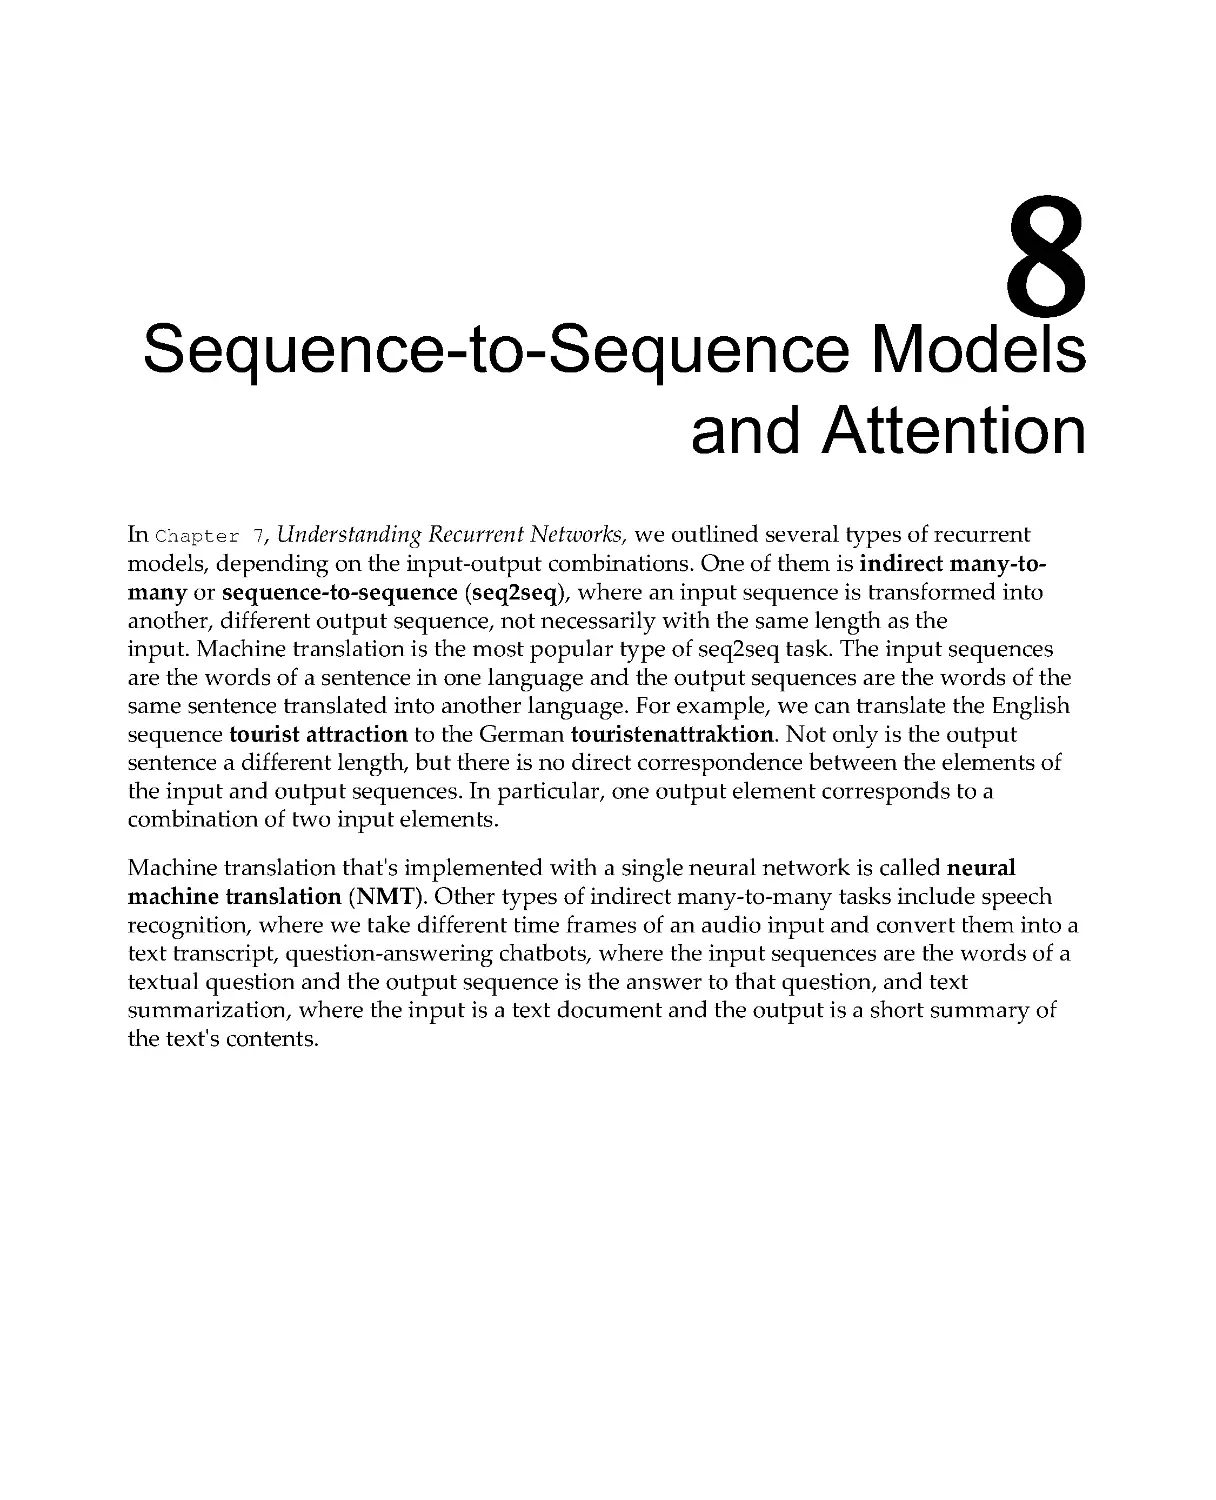 Chapter 8: Sequence-to-Sequence Models and Attention